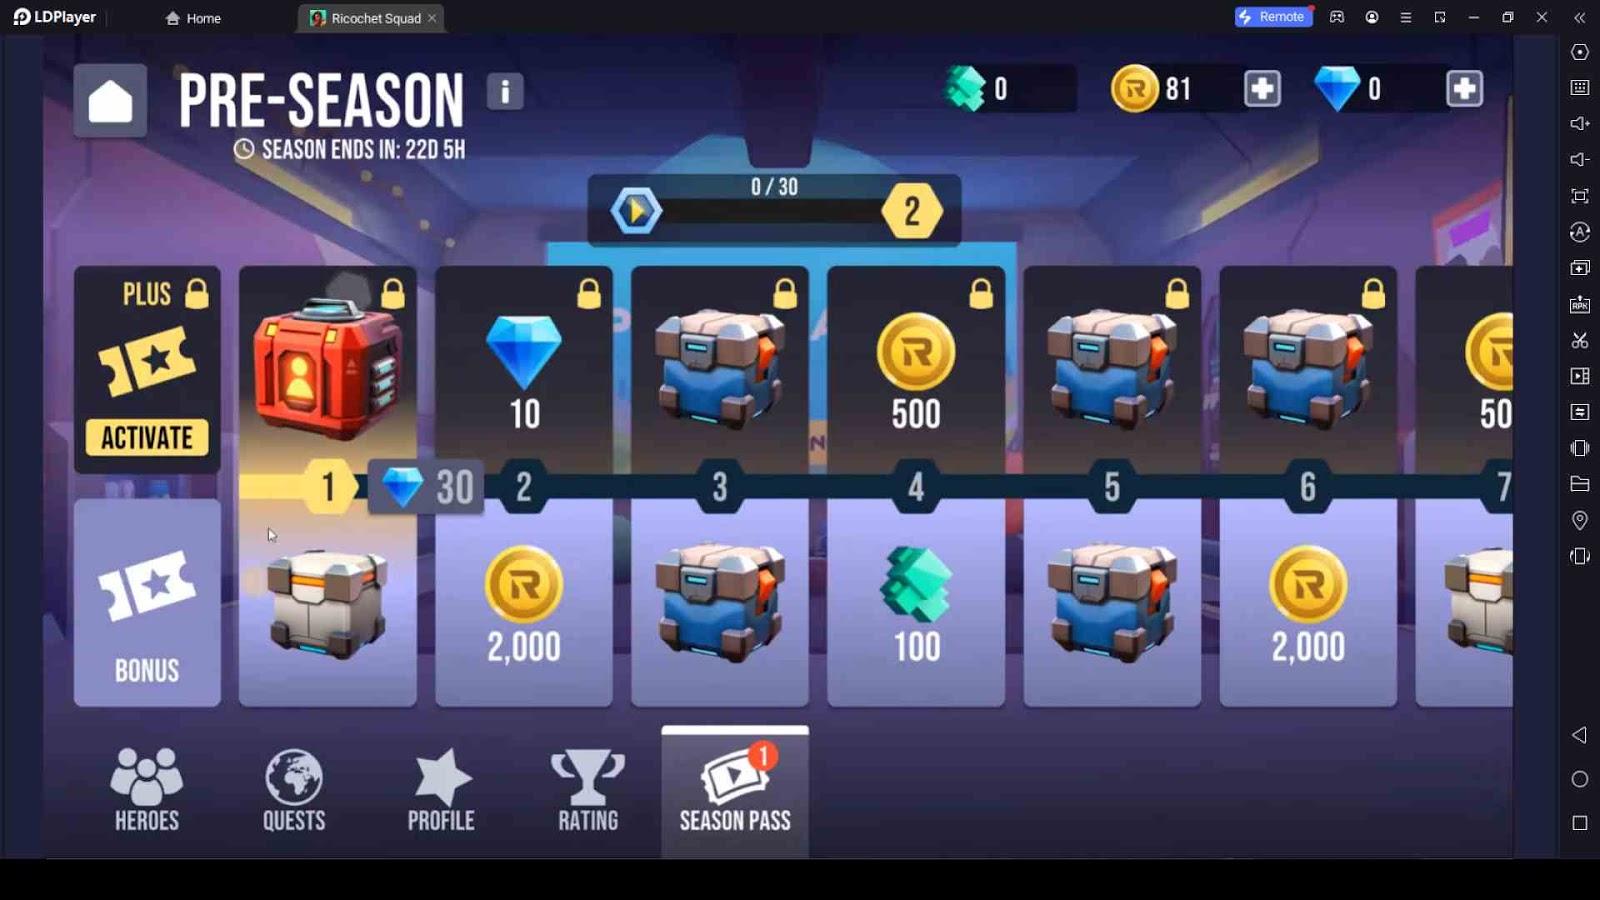 Collect Rewards from the Pre-Season